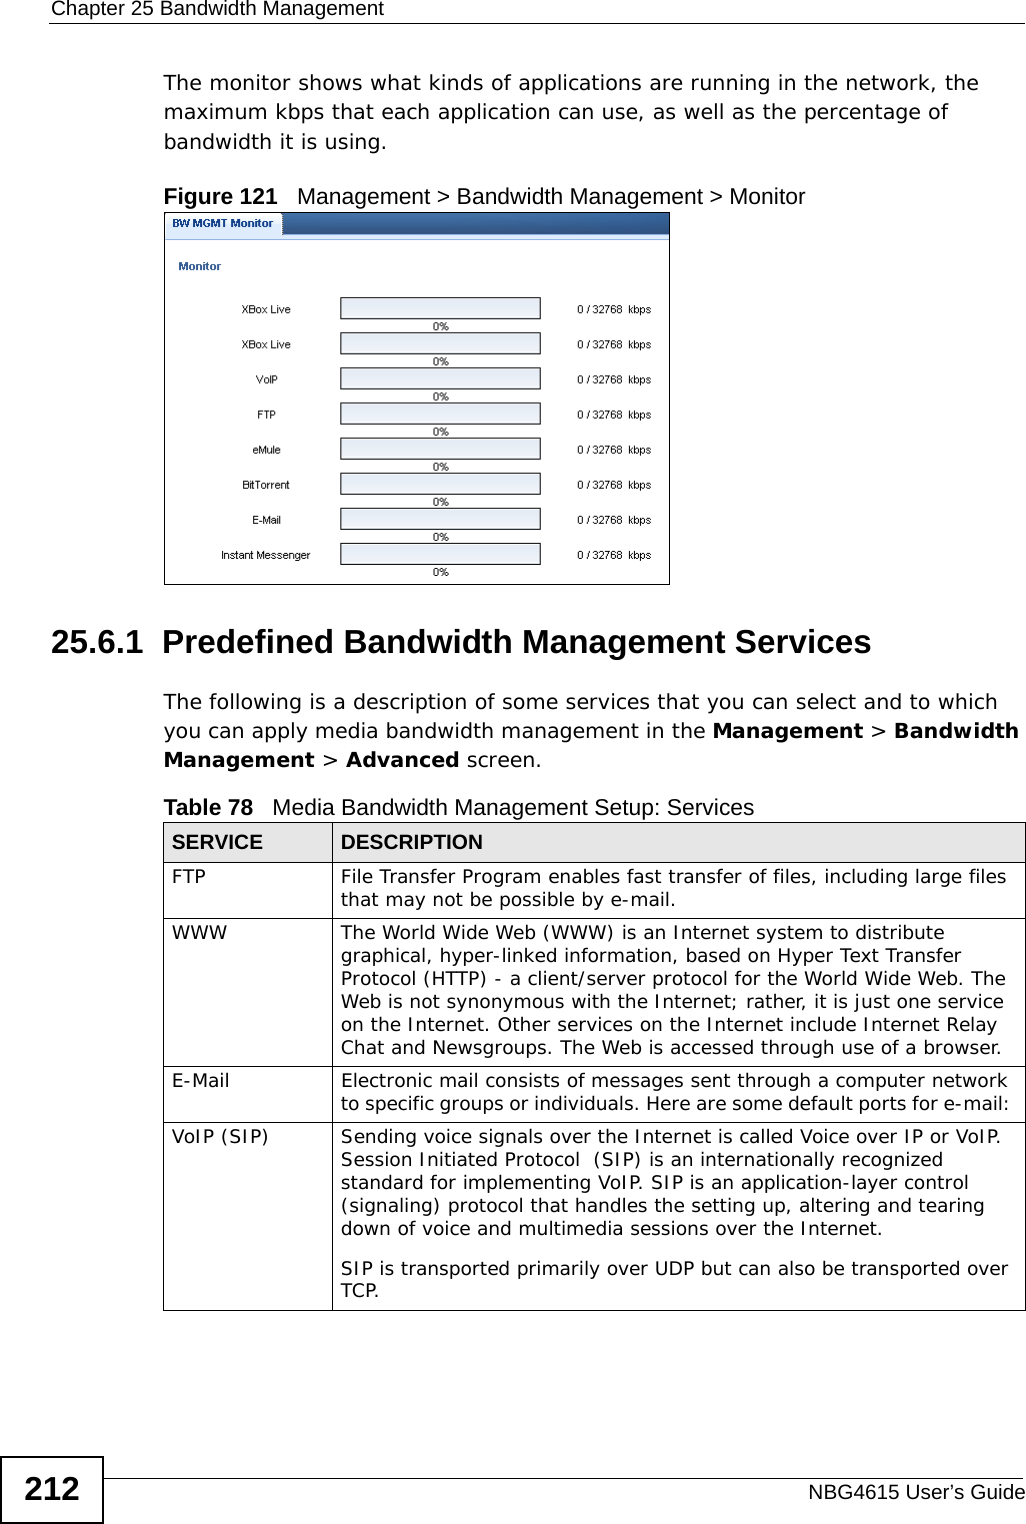 Chapter 25 Bandwidth ManagementNBG4615 User’s Guide212The monitor shows what kinds of applications are running in the network, the maximum kbps that each application can use, as well as the percentage of bandwidth it is using. Figure 121   Management &gt; Bandwidth Management &gt; Monitor25.6.1  Predefined Bandwidth Management ServicesThe following is a description of some services that you can select and to which you can apply media bandwidth management in the Management &gt; Bandwidth Management &gt; Advanced screen. Table 78   Media Bandwidth Management Setup: ServicesSERVICE DESCRIPTIONFTP File Transfer Program enables fast transfer of files, including large files that may not be possible by e-mail.WWW The World Wide Web (WWW) is an Internet system to distribute graphical, hyper-linked information, based on Hyper Text Transfer Protocol (HTTP) - a client/server protocol for the World Wide Web. The Web is not synonymous with the Internet; rather, it is just one service on the Internet. Other services on the Internet include Internet Relay Chat and Newsgroups. The Web is accessed through use of a browser. E-Mail Electronic mail consists of messages sent through a computer network to specific groups or individuals. Here are some default ports for e-mail: VoIP (SIP) Sending voice signals over the Internet is called Voice over IP or VoIP. Session Initiated Protocol  (SIP) is an internationally recognized standard for implementing VoIP. SIP is an application-layer control (signaling) protocol that handles the setting up, altering and tearing down of voice and multimedia sessions over the Internet.SIP is transported primarily over UDP but can also be transported over TCP. 